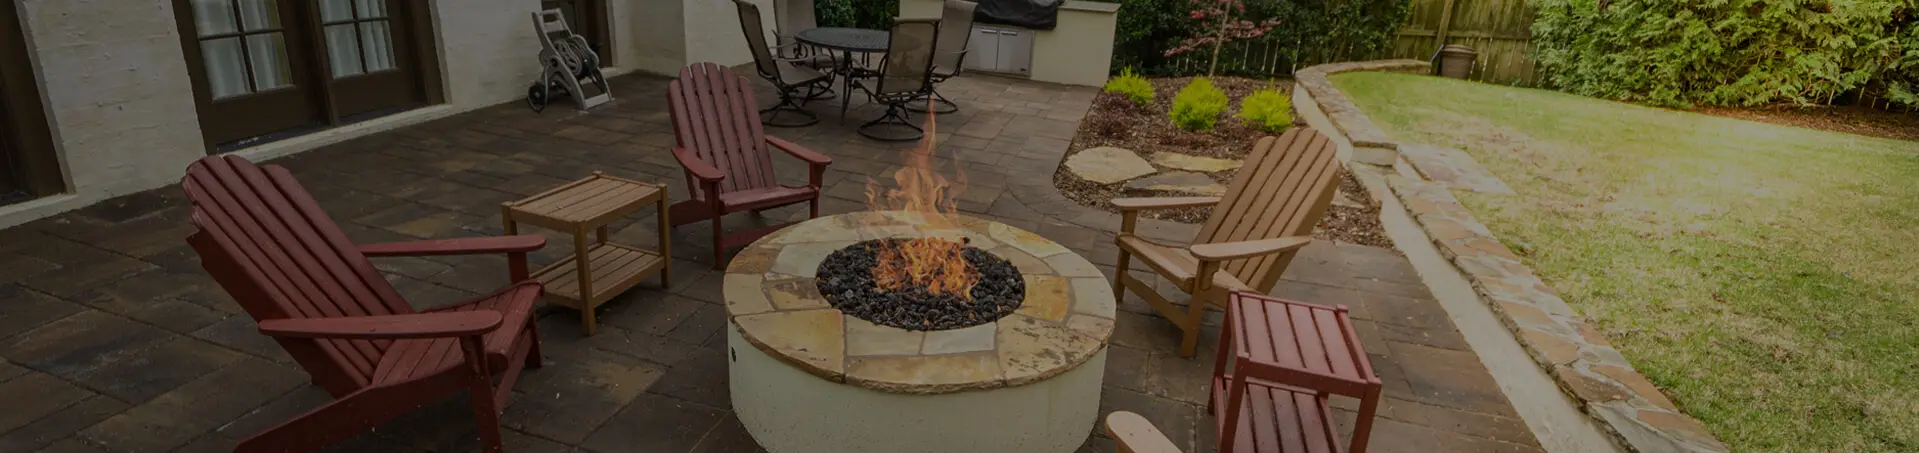 Outdoor makeover: Decatur-Firepits-Banner